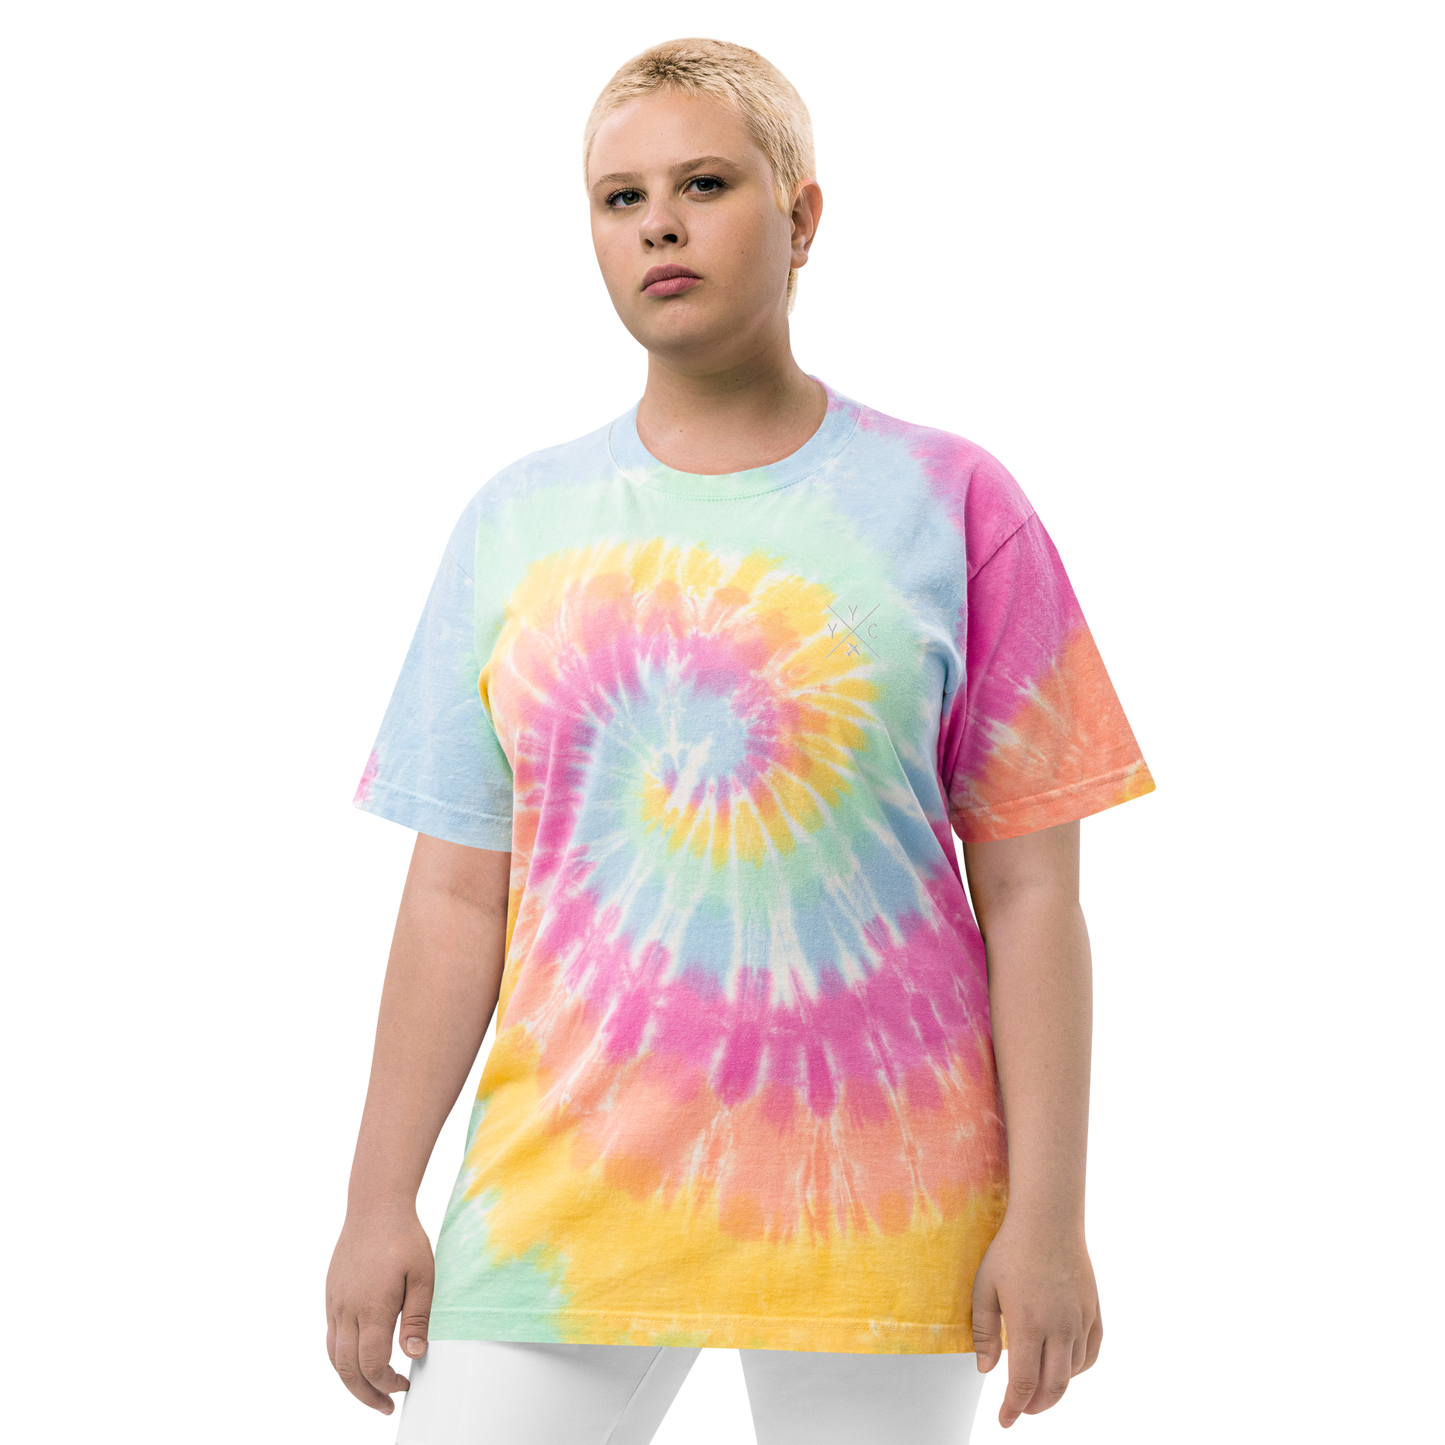 YHM Designs - YYC Calgary Oversized Tie-Dye T-Shirt - Crossed-X Design with Airport Code and Vintage Propliner - White Embroidery - Image 11